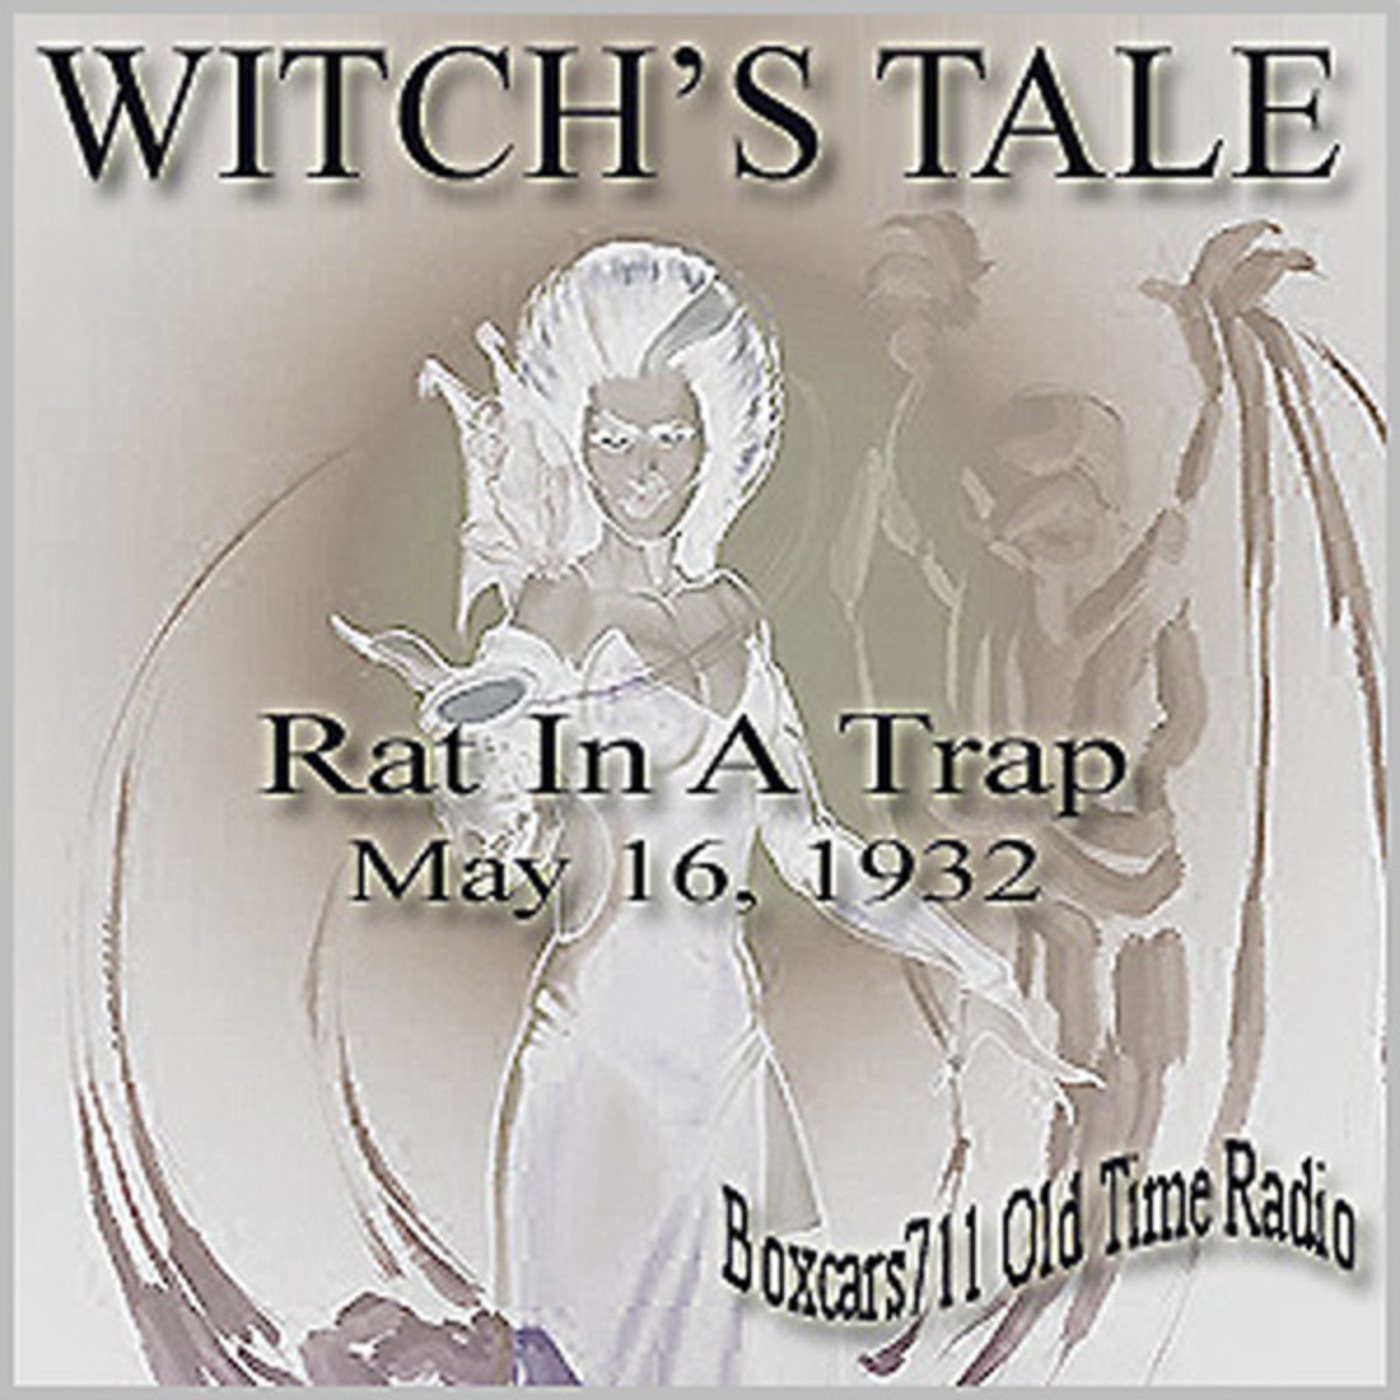 Episode 9534: Witch's Tale - 